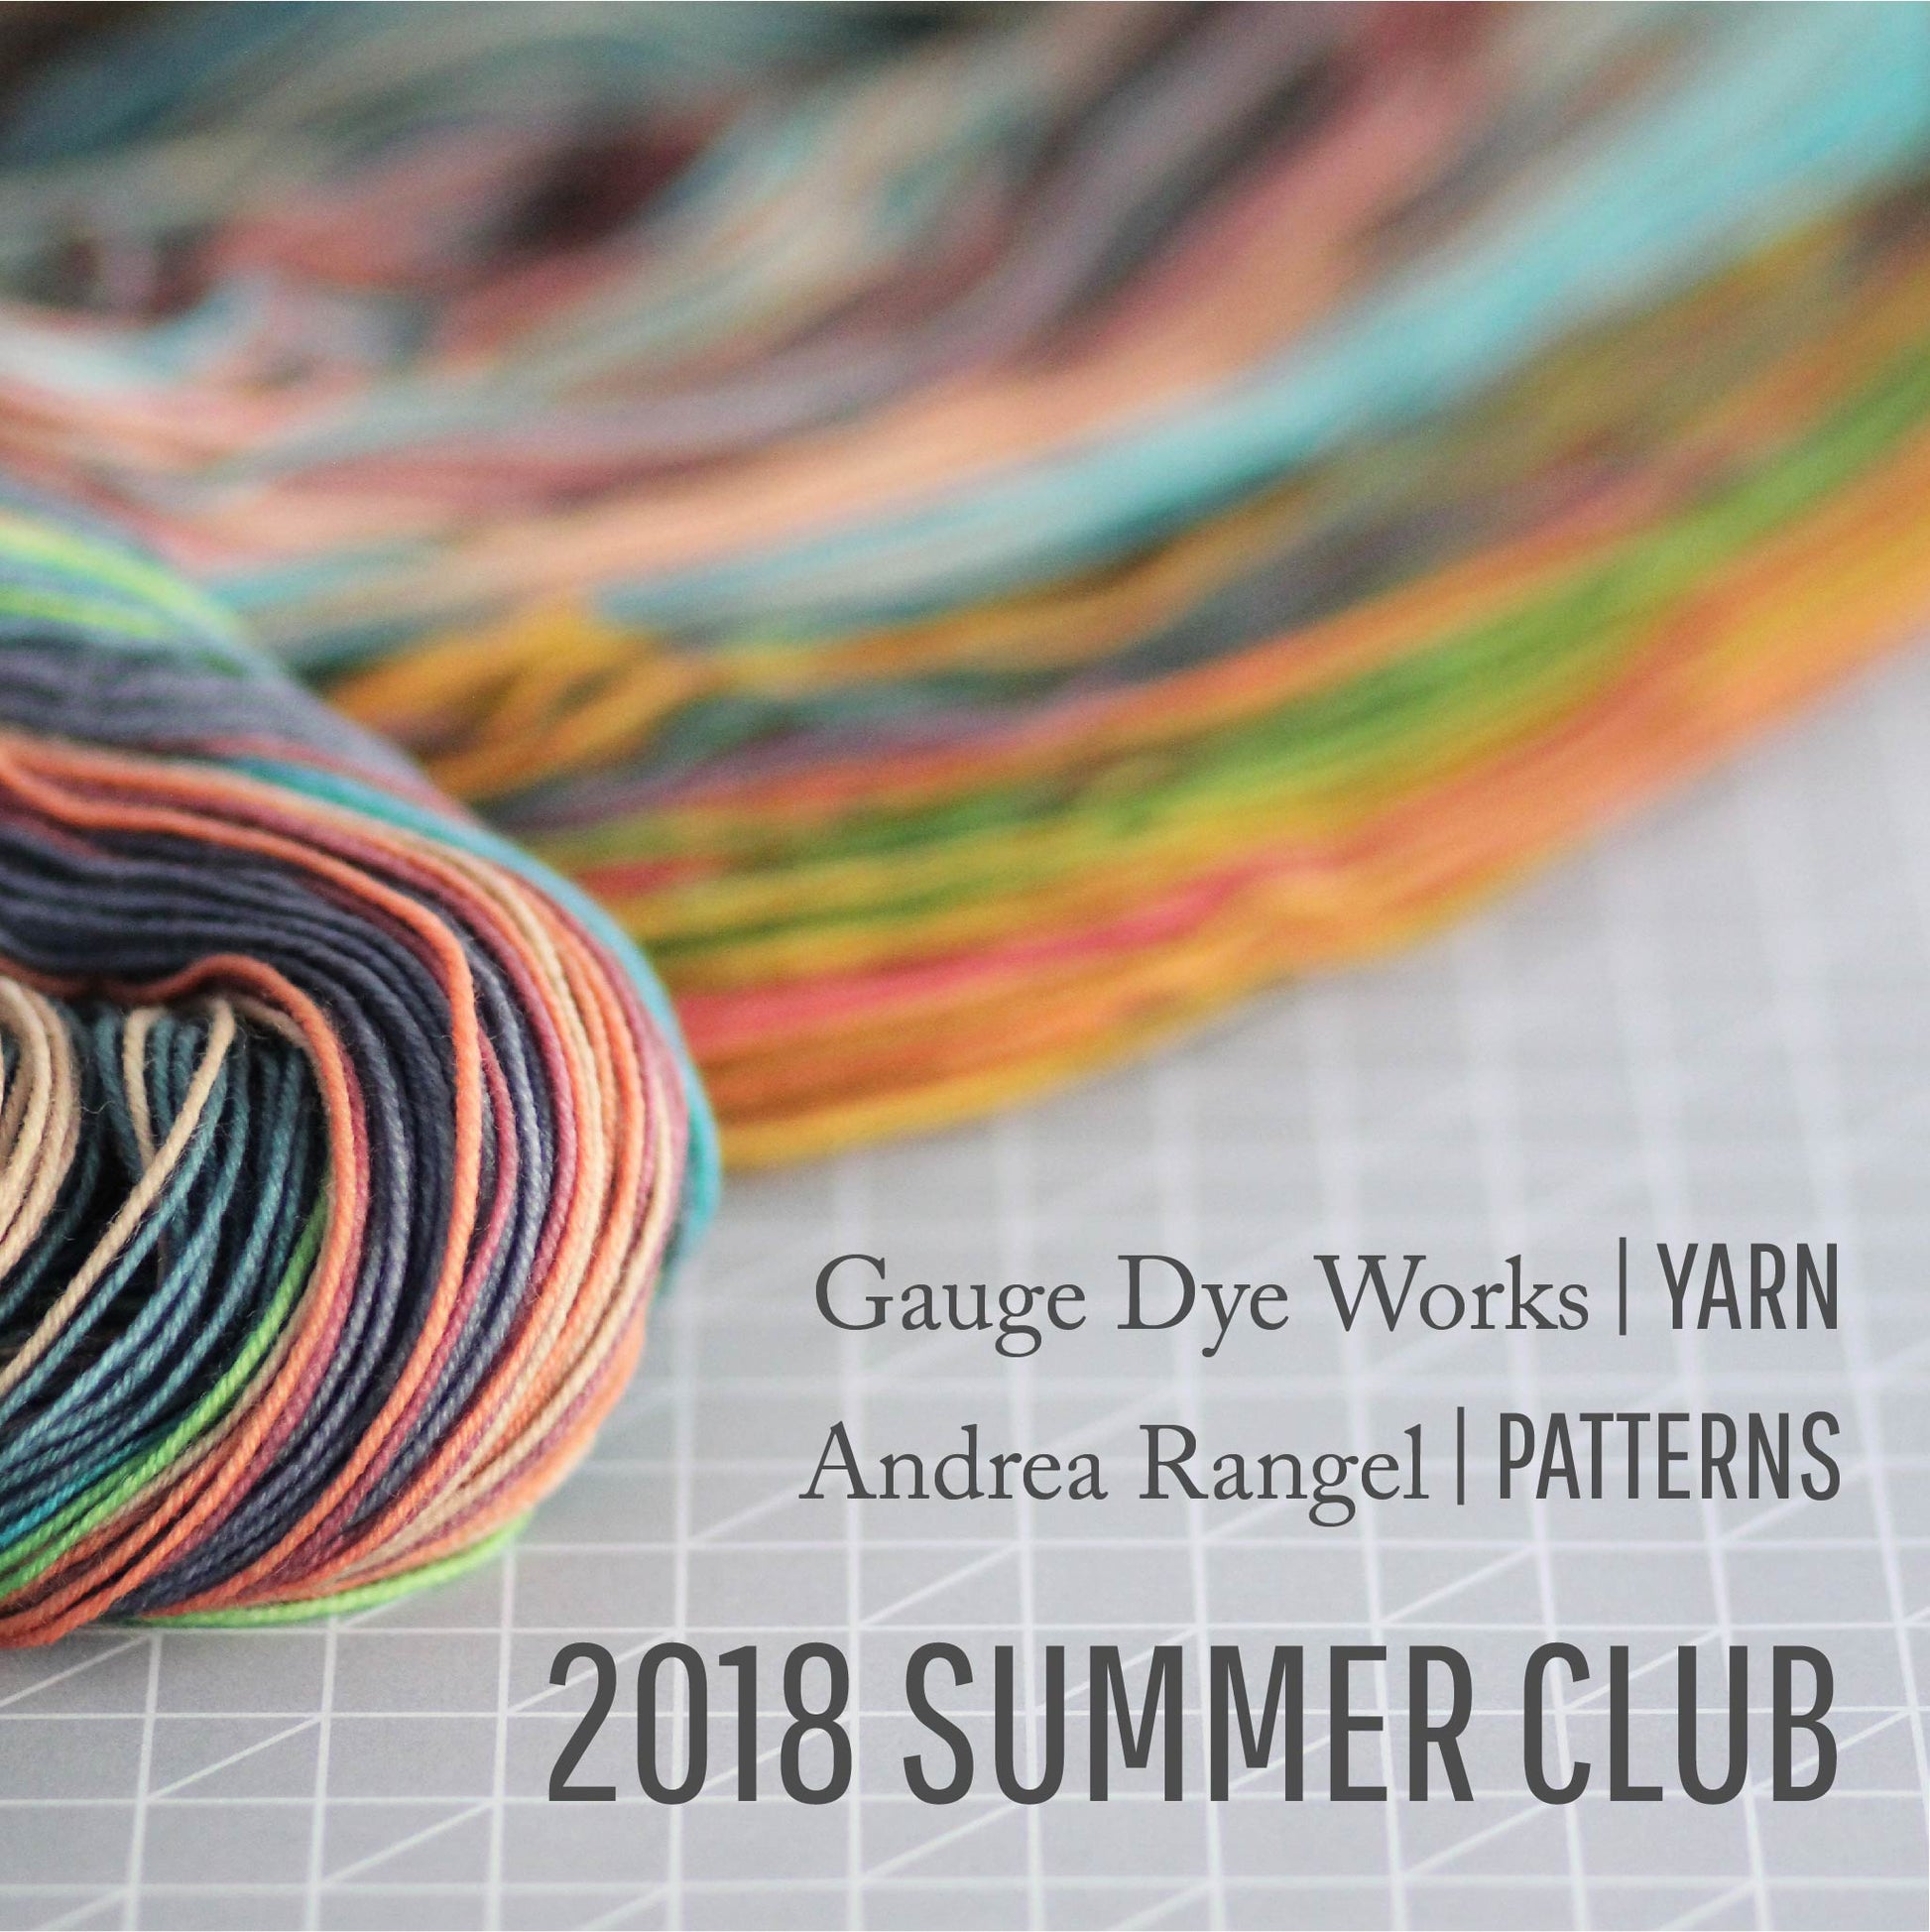 Yarn and pattern subscription club from Gauge Dye Works and Andrea Rangel